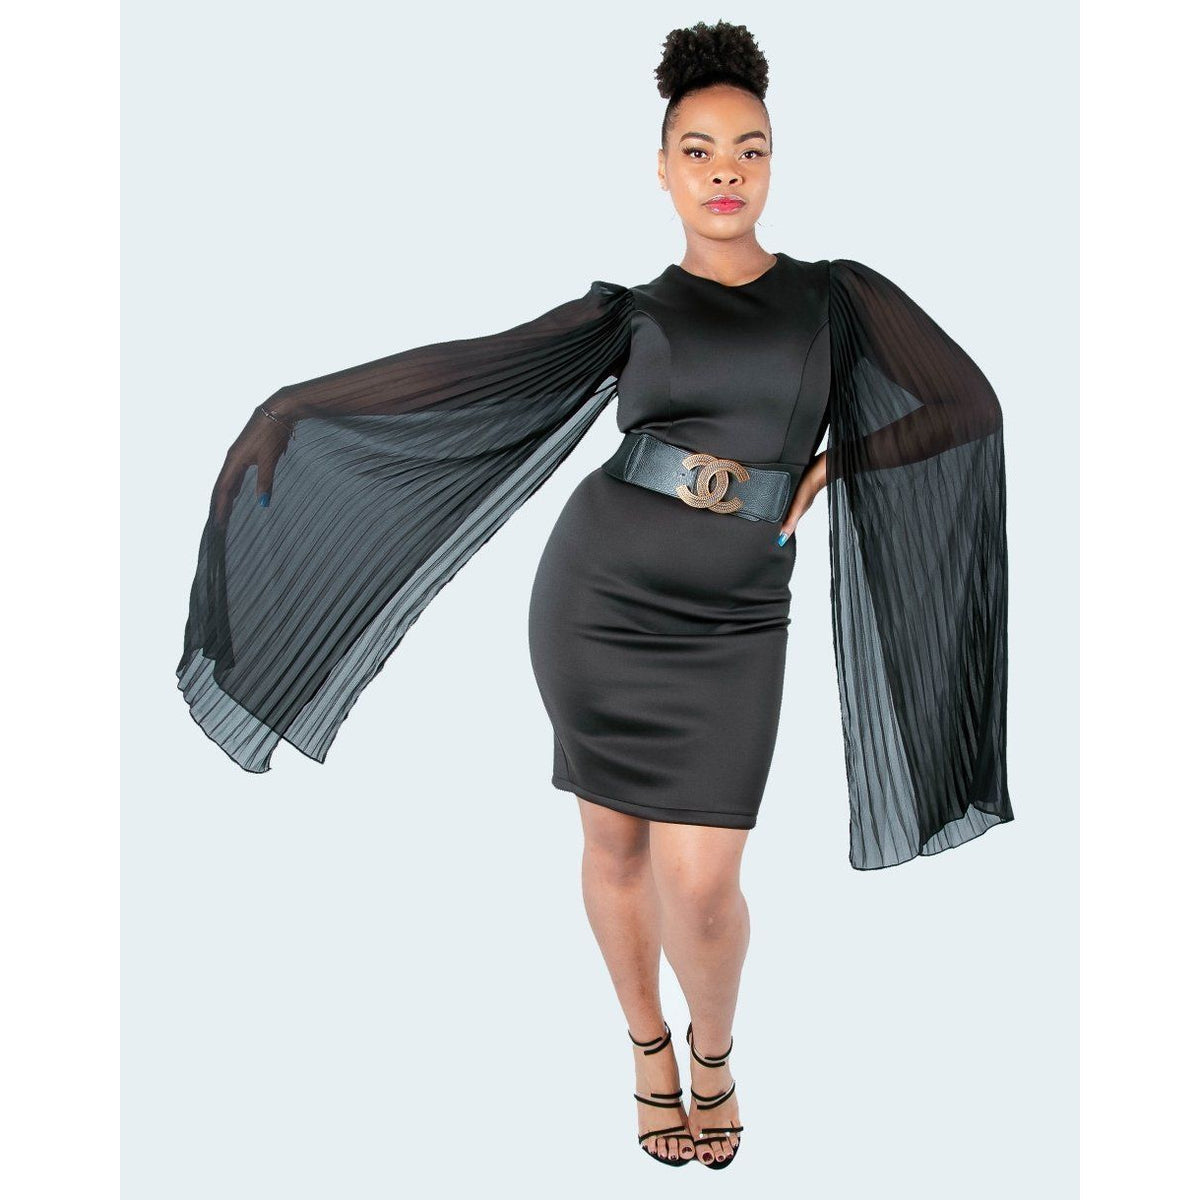 Dark and Lovely Body Con Dress (Black) Miss Who